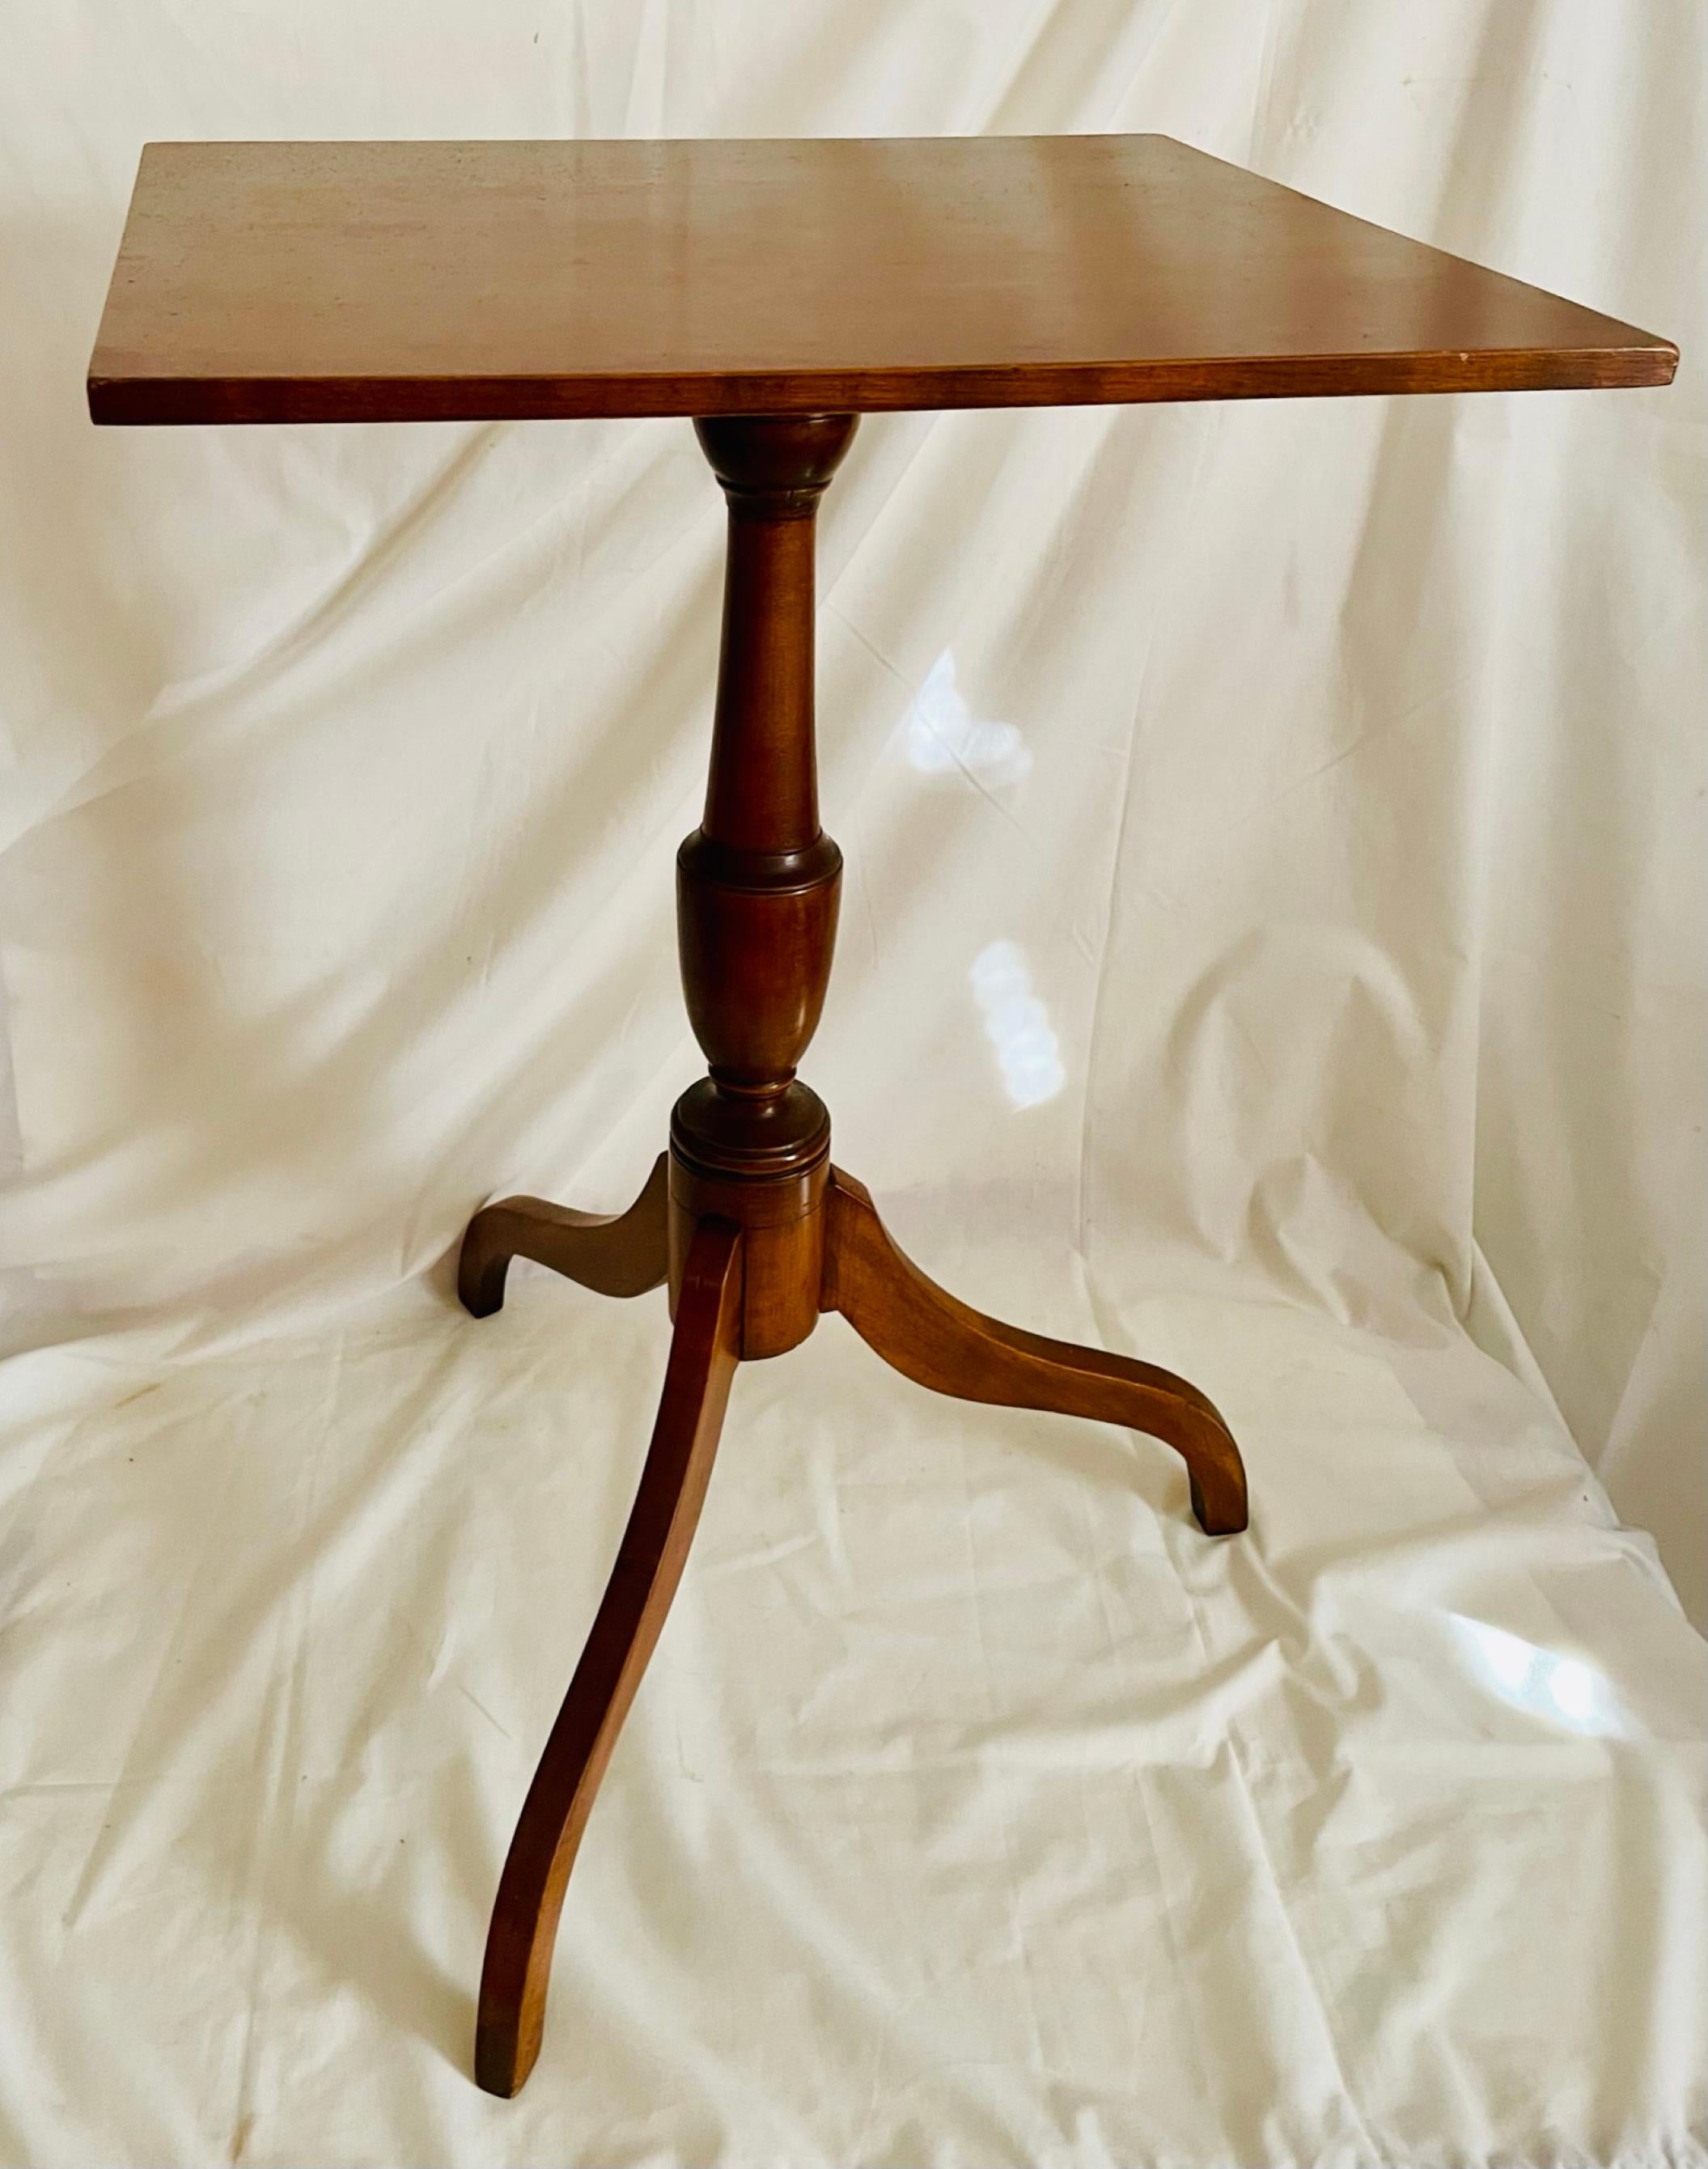 19th Century Federal Style Pedestal Side Table In Good Condition For Sale In Vero Beach, FL